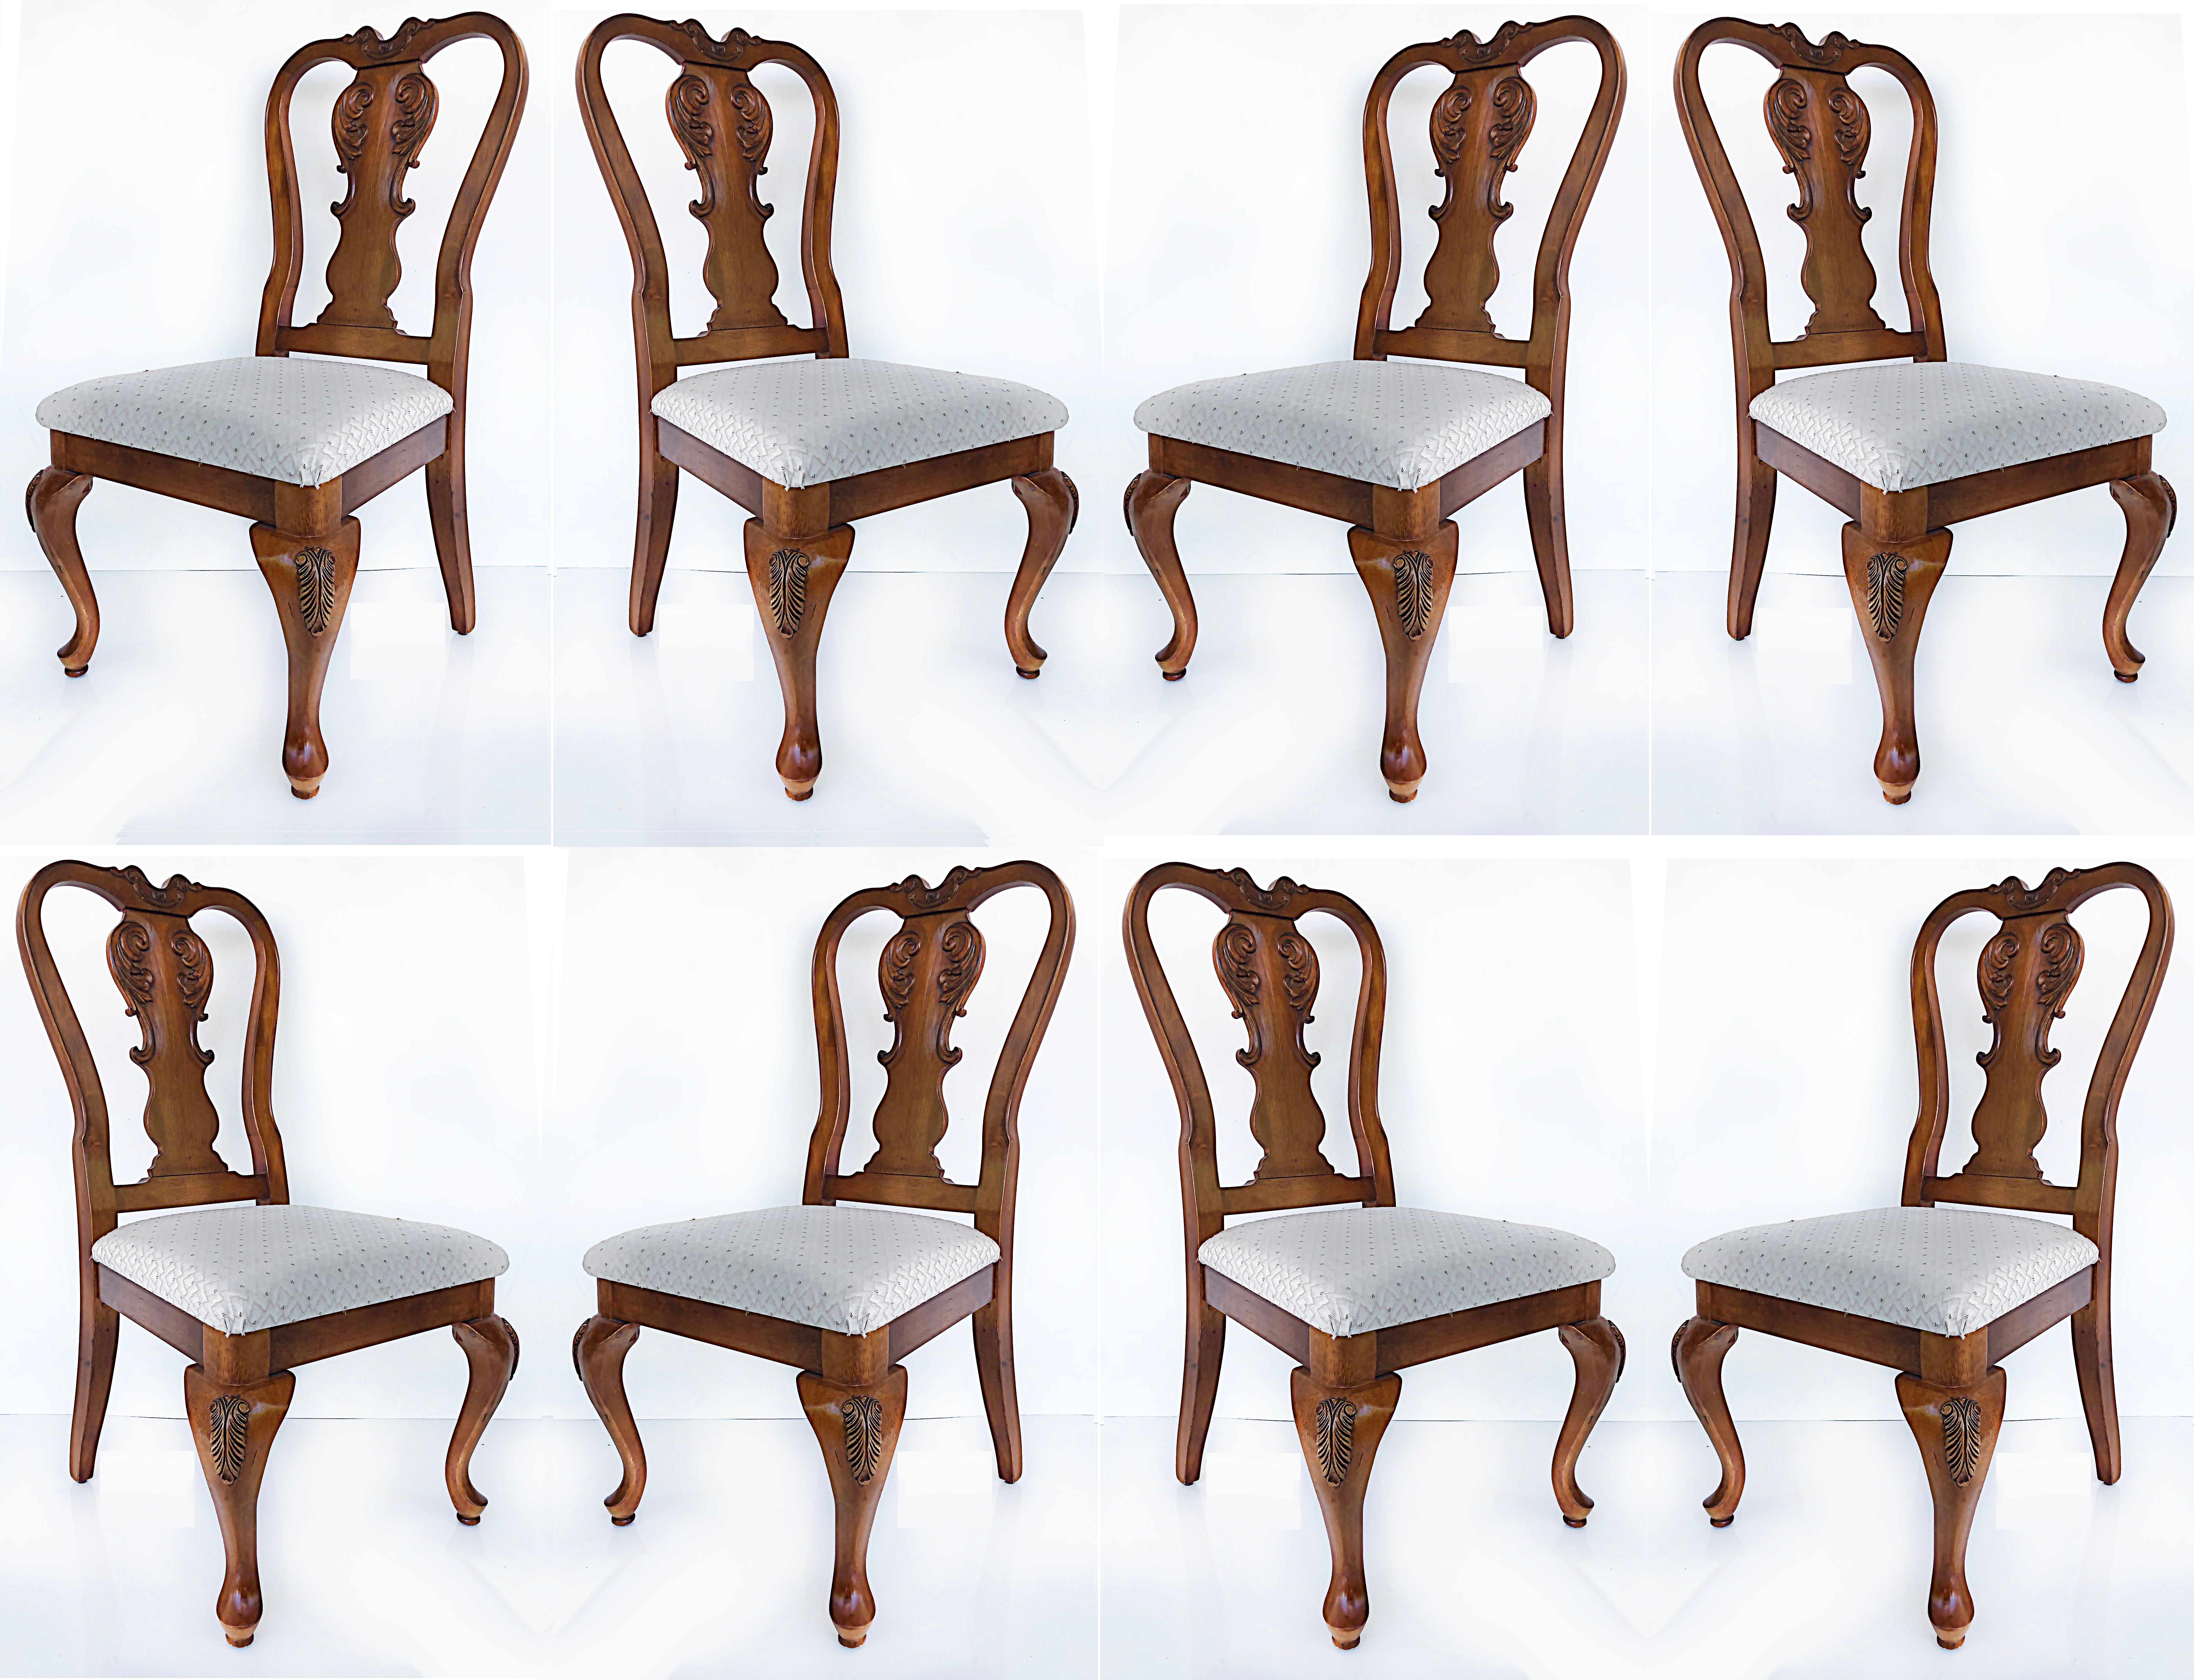 Set of 8 French Provincial Style Dining Room Chairs, Cabriole Legs 9